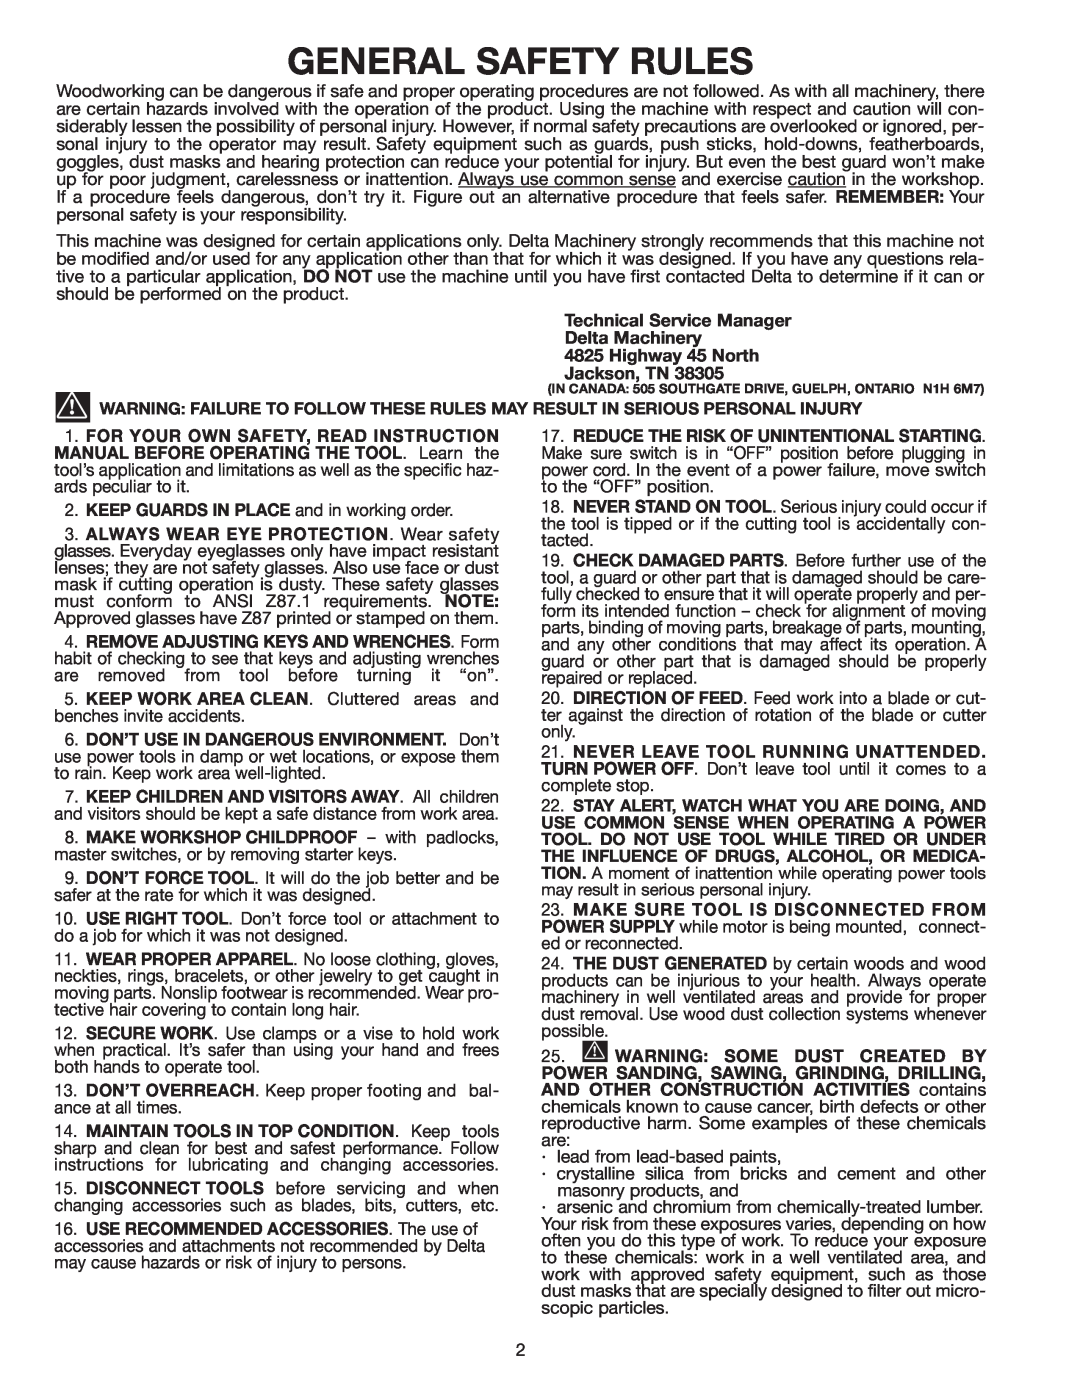 Delta 28-299A, 28-241 instruction manual General Safety Rules 